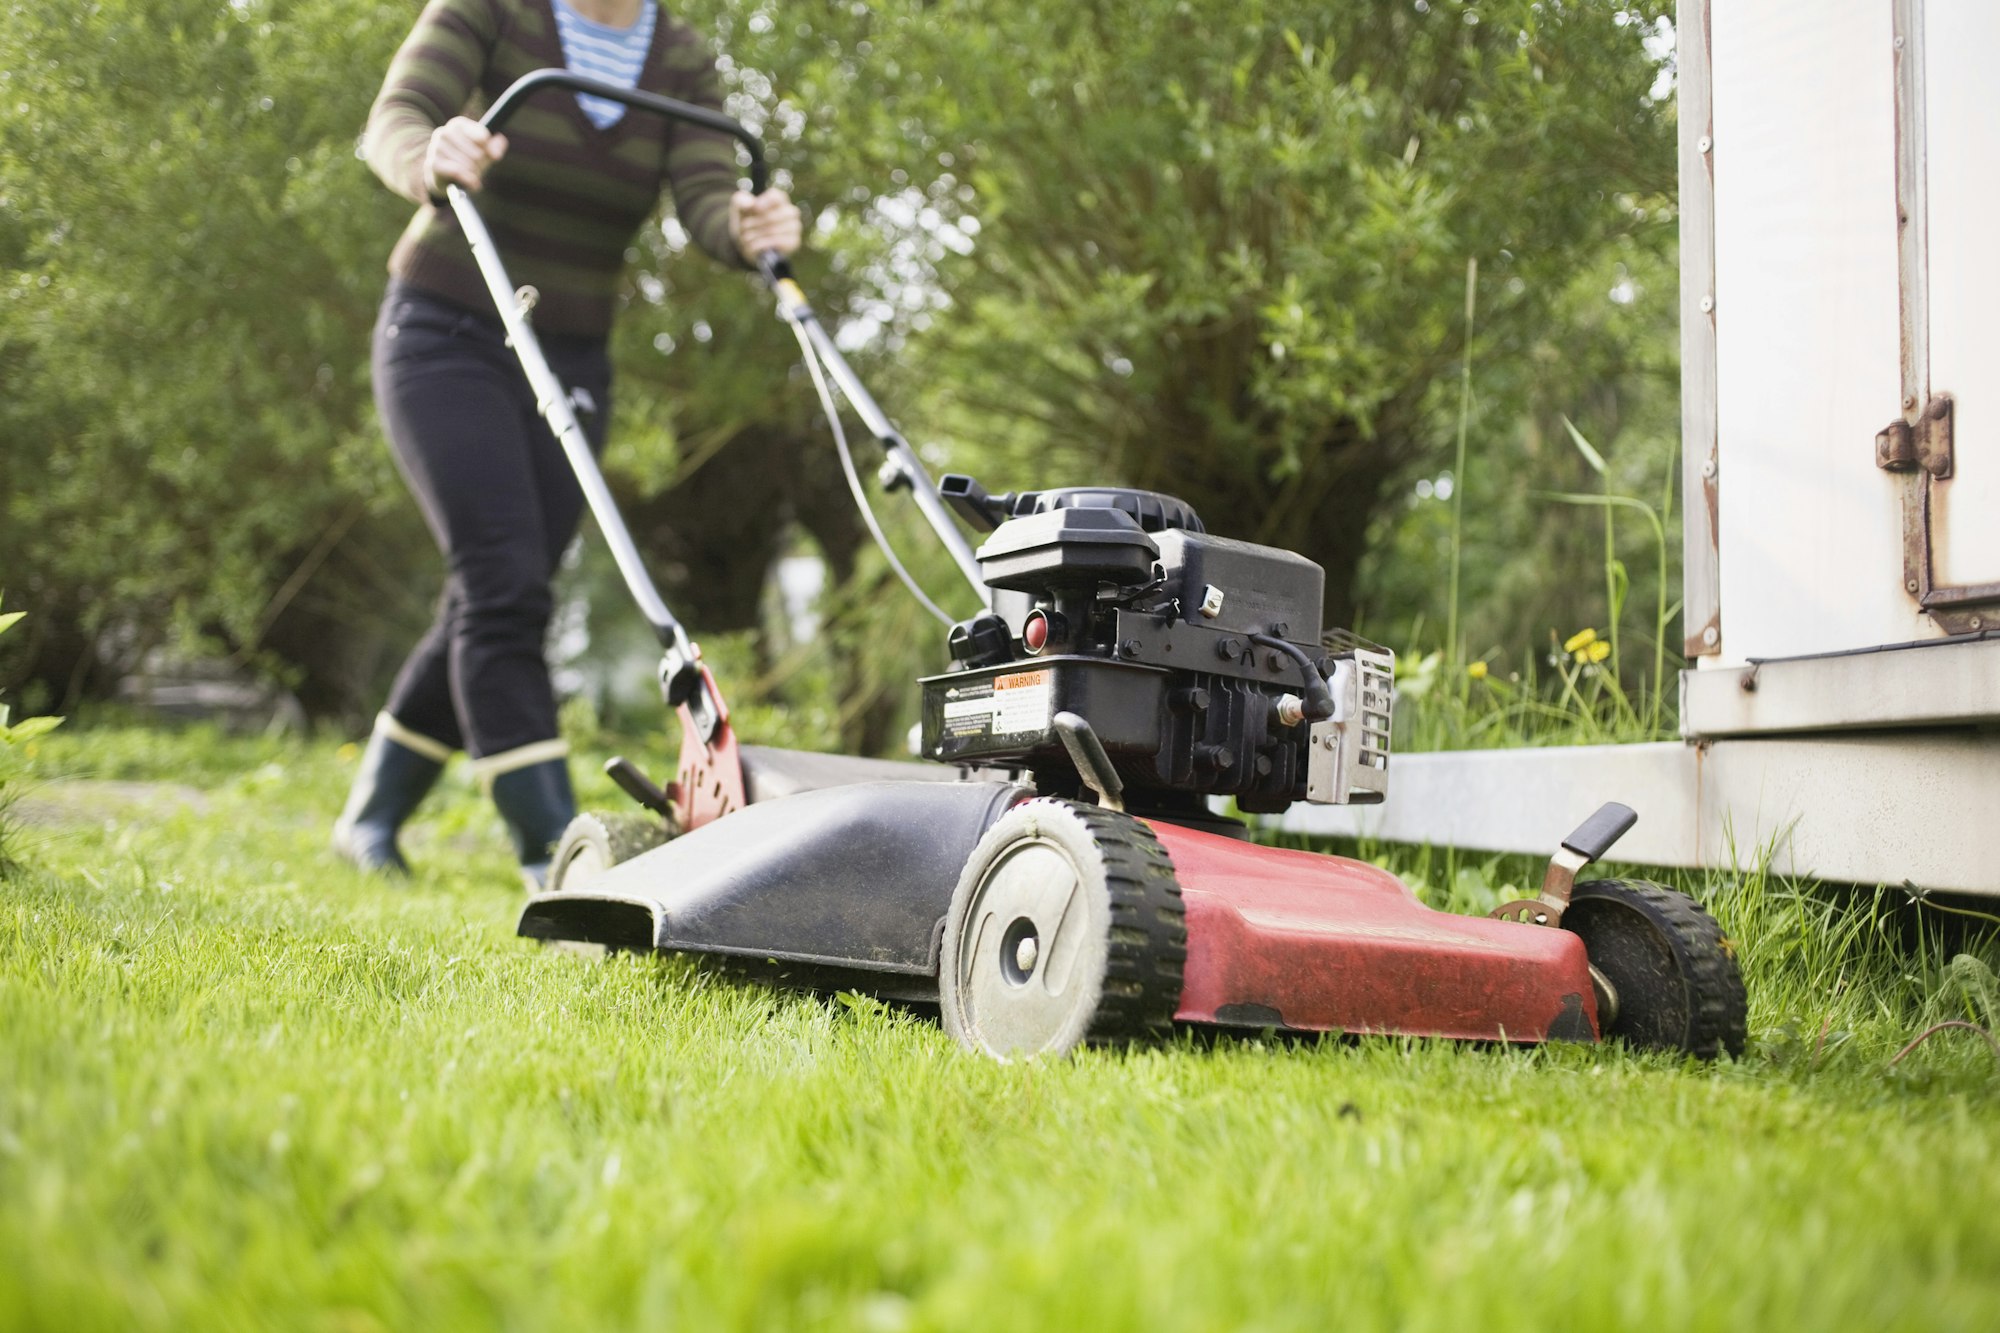 Low section of woman mowing lawn